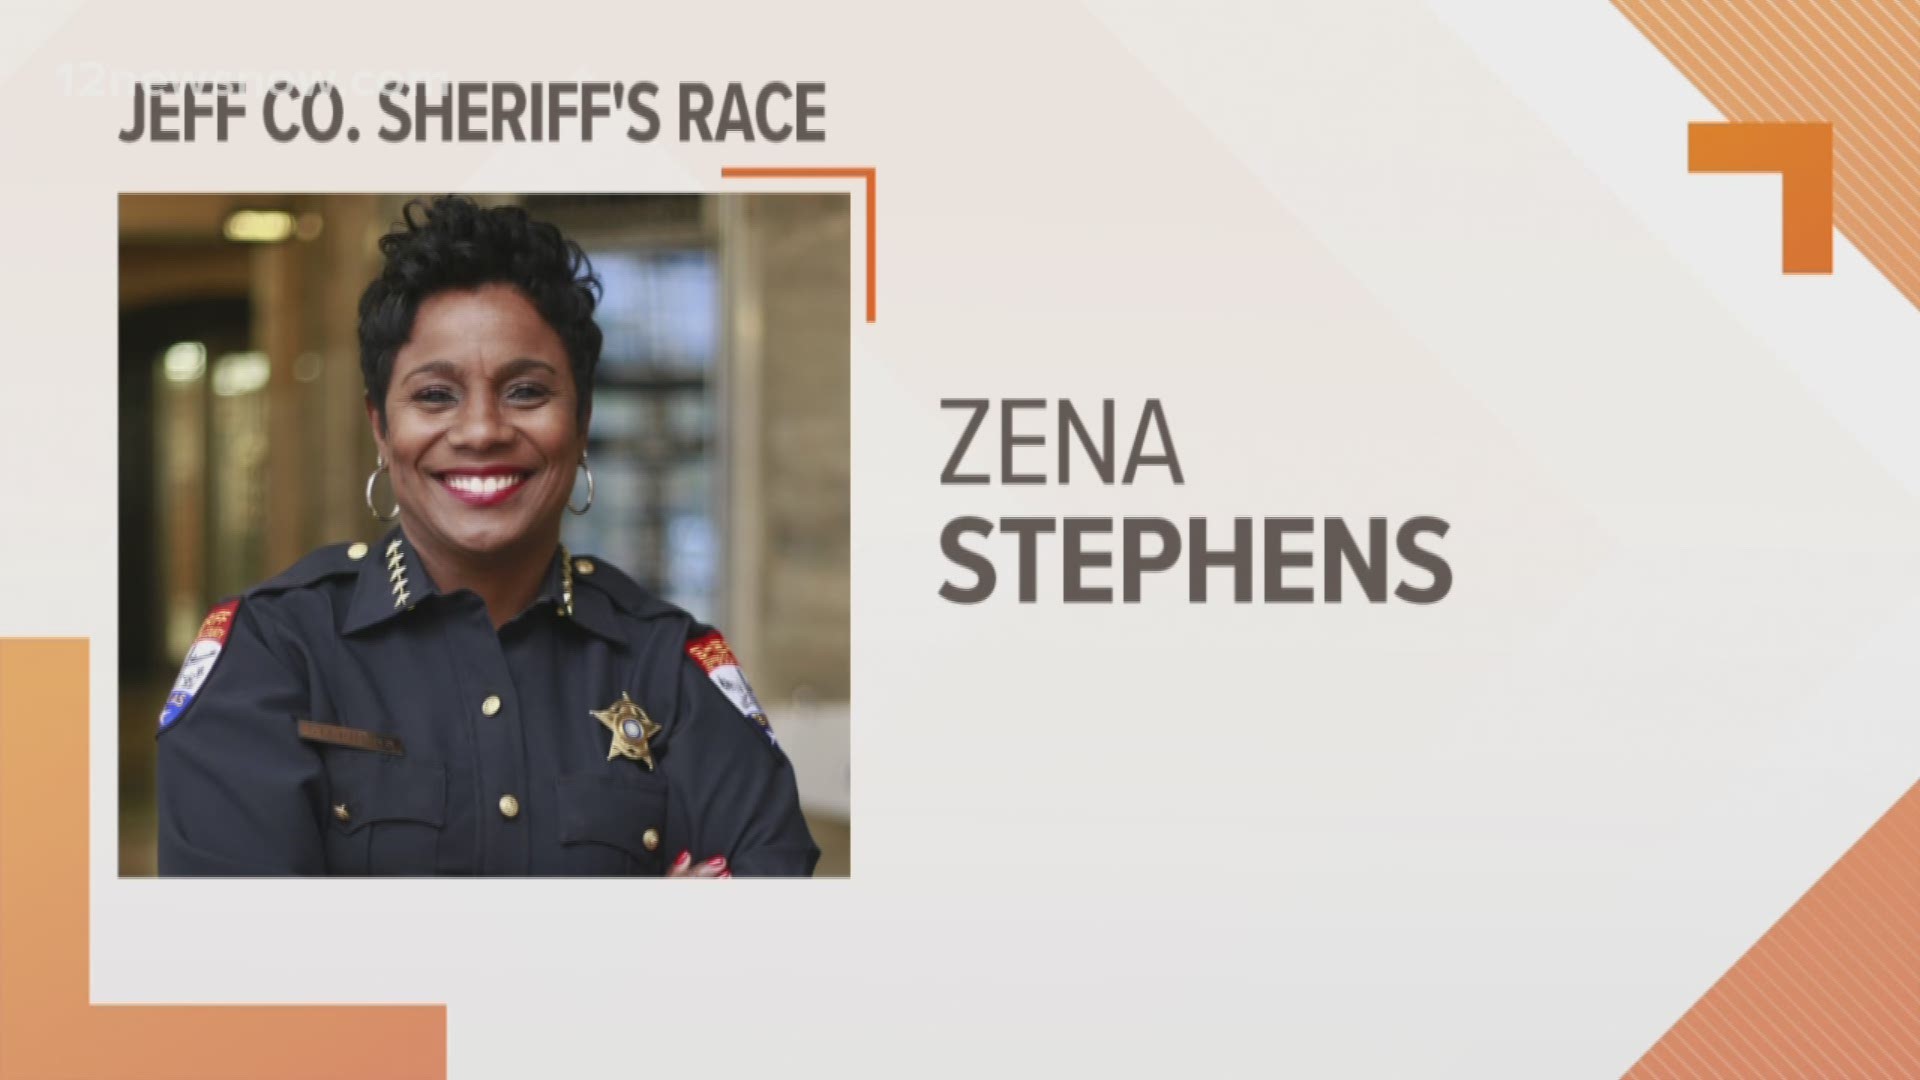 Democratic incumbent Sheriff Zena Stephens will face whoever wins the GOP primary. David Odom and Emil Cerda have both filed to run as Republicans.